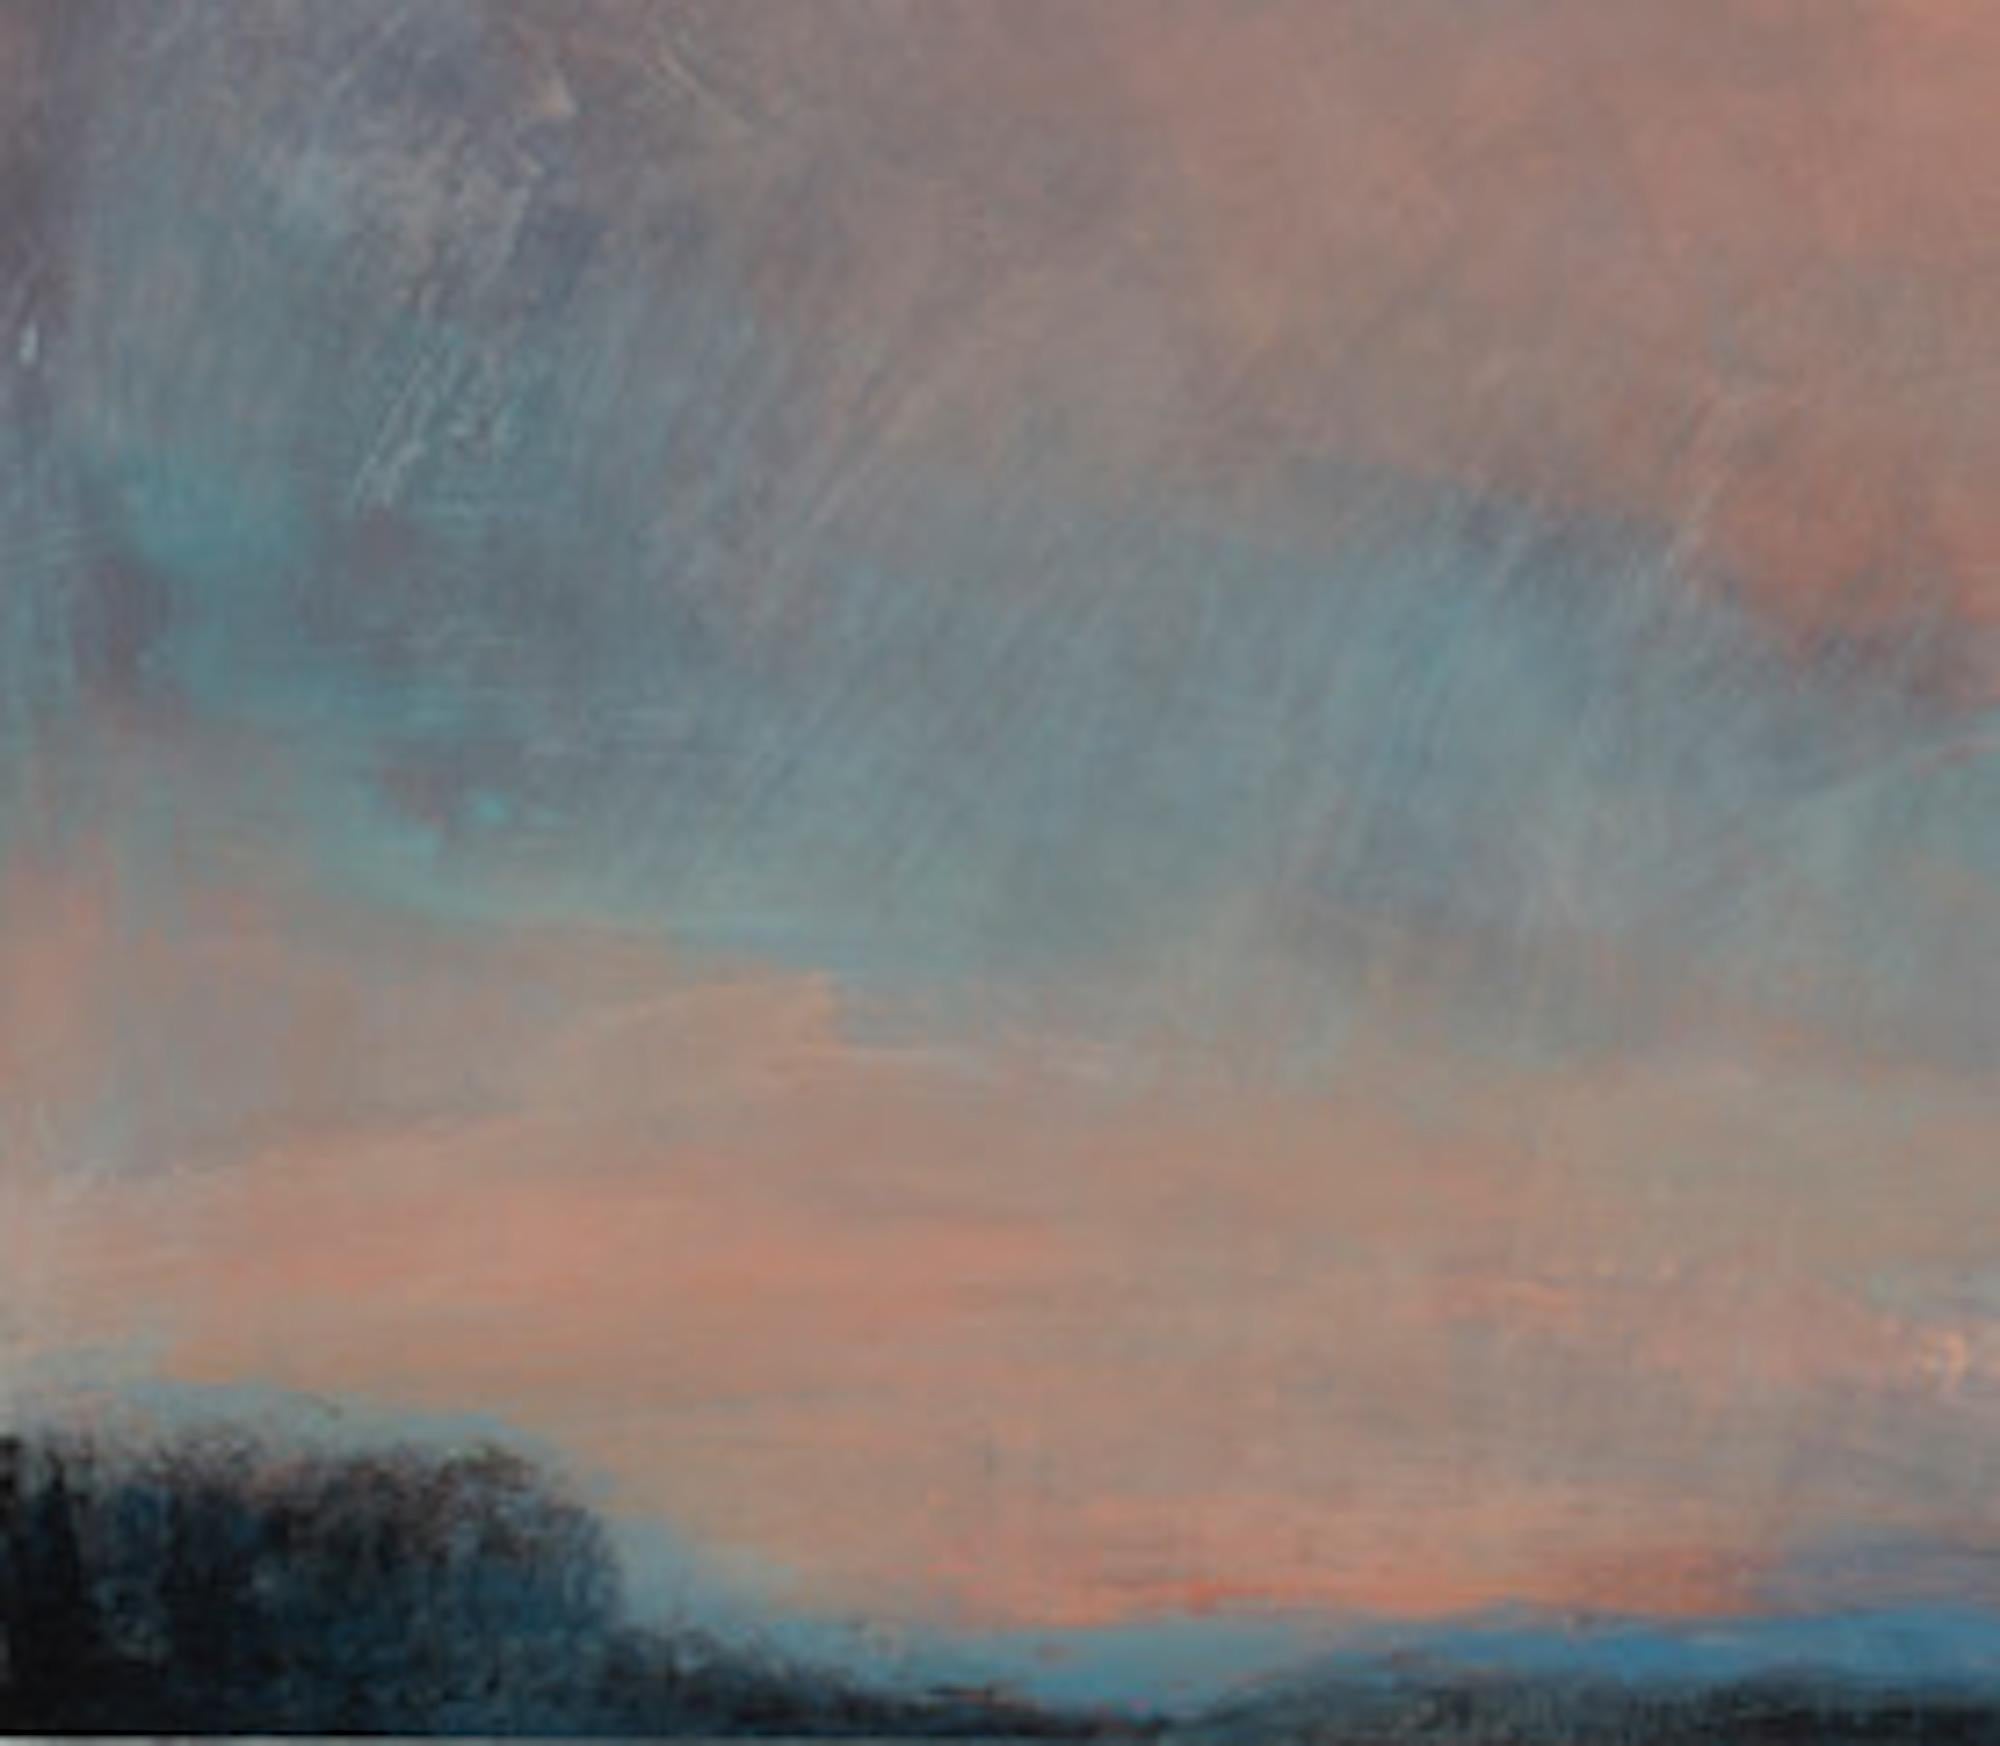 Resilient Sky, skyscape art, original painting, blue and red art, affordable art - Contemporary Painting by Alex McIntyre 